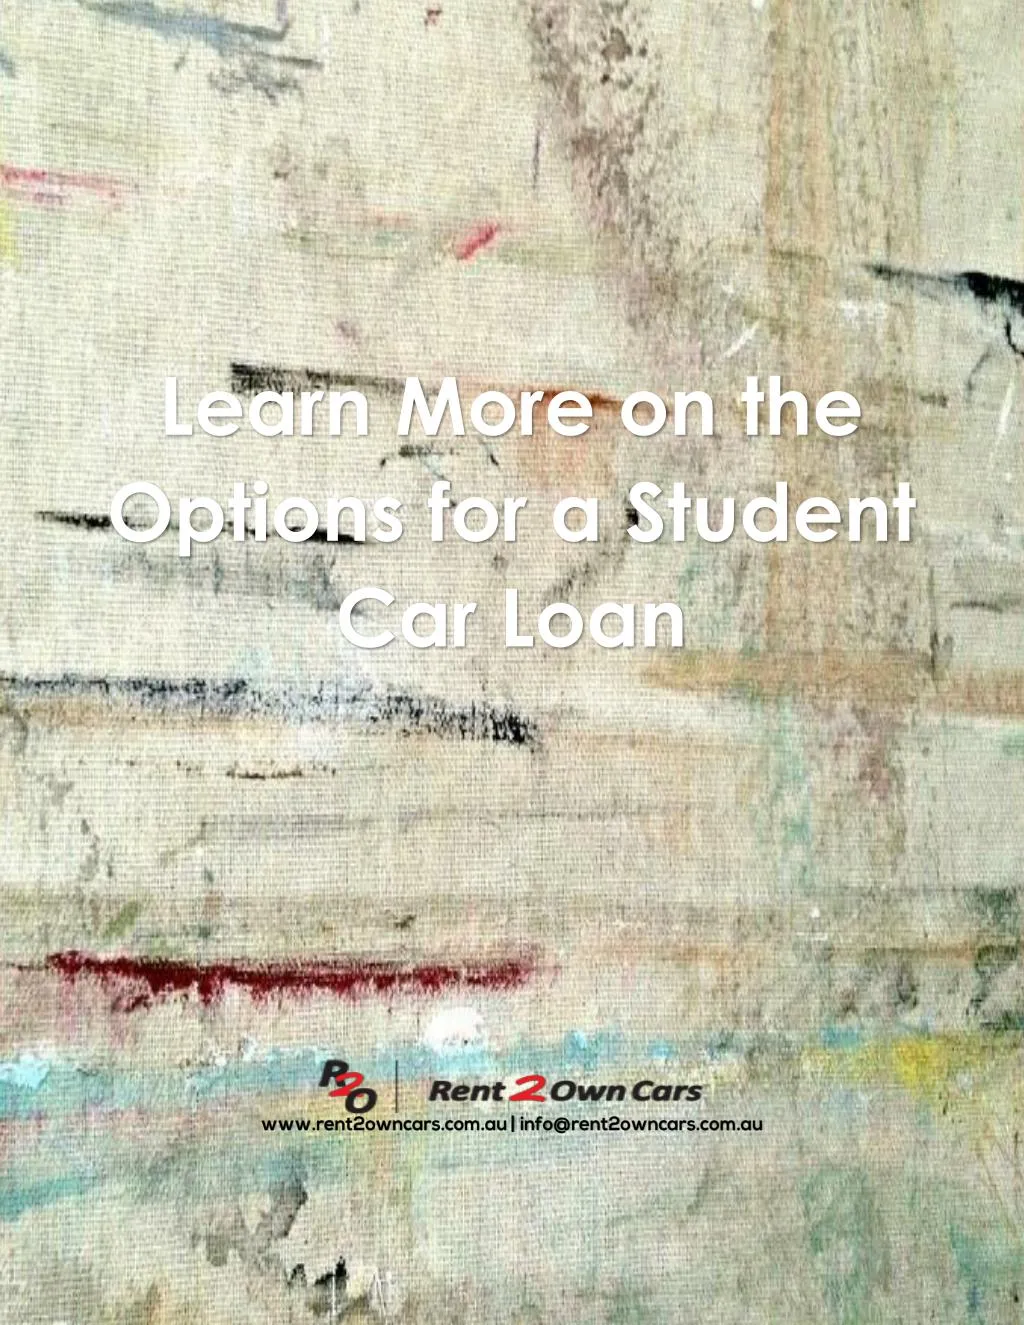 learn more on the options for a student car loan